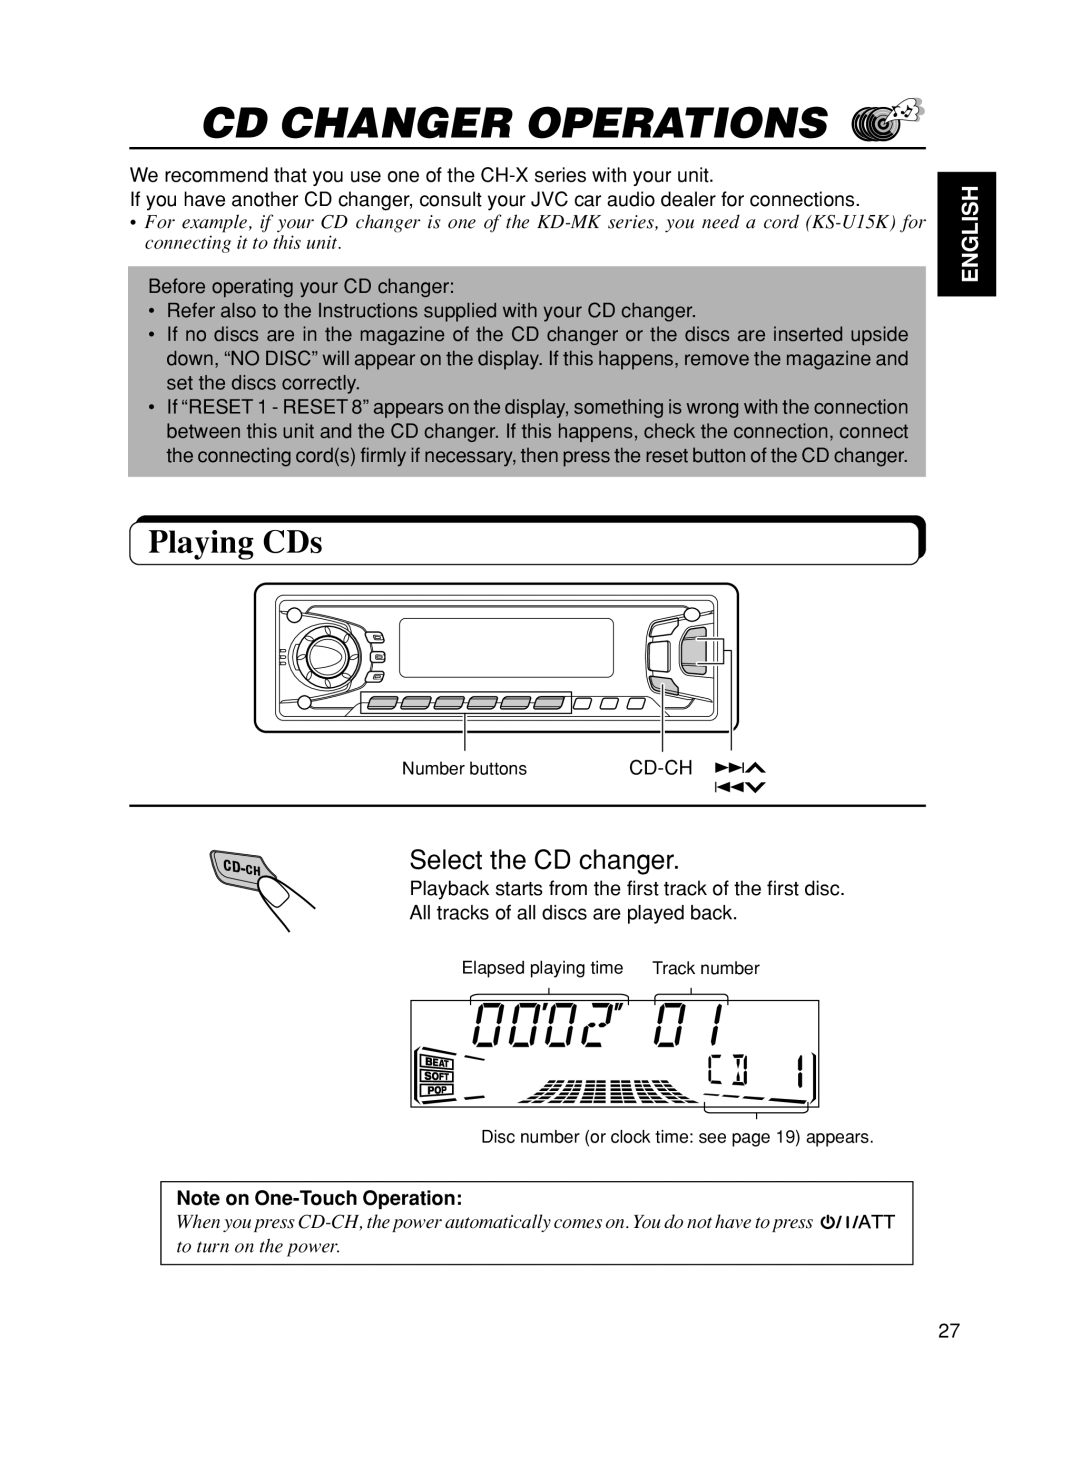 JVC KS-FX90 manual Cd Changer Operations, Playing CDs, Select the CD changer, English, Note on One-TouchOperation 